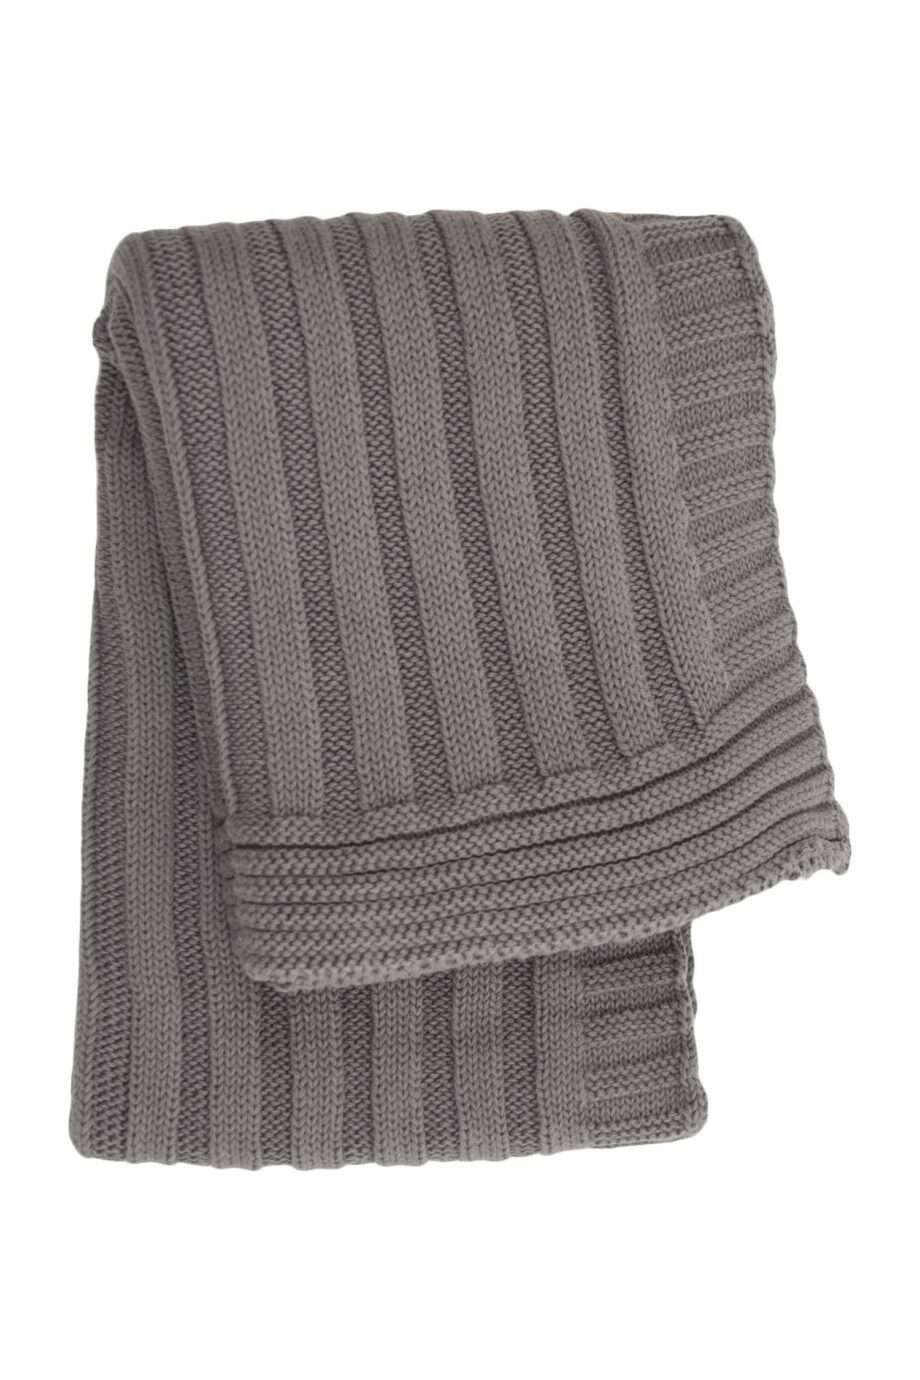 ribs grey knitted cotton little blanket small